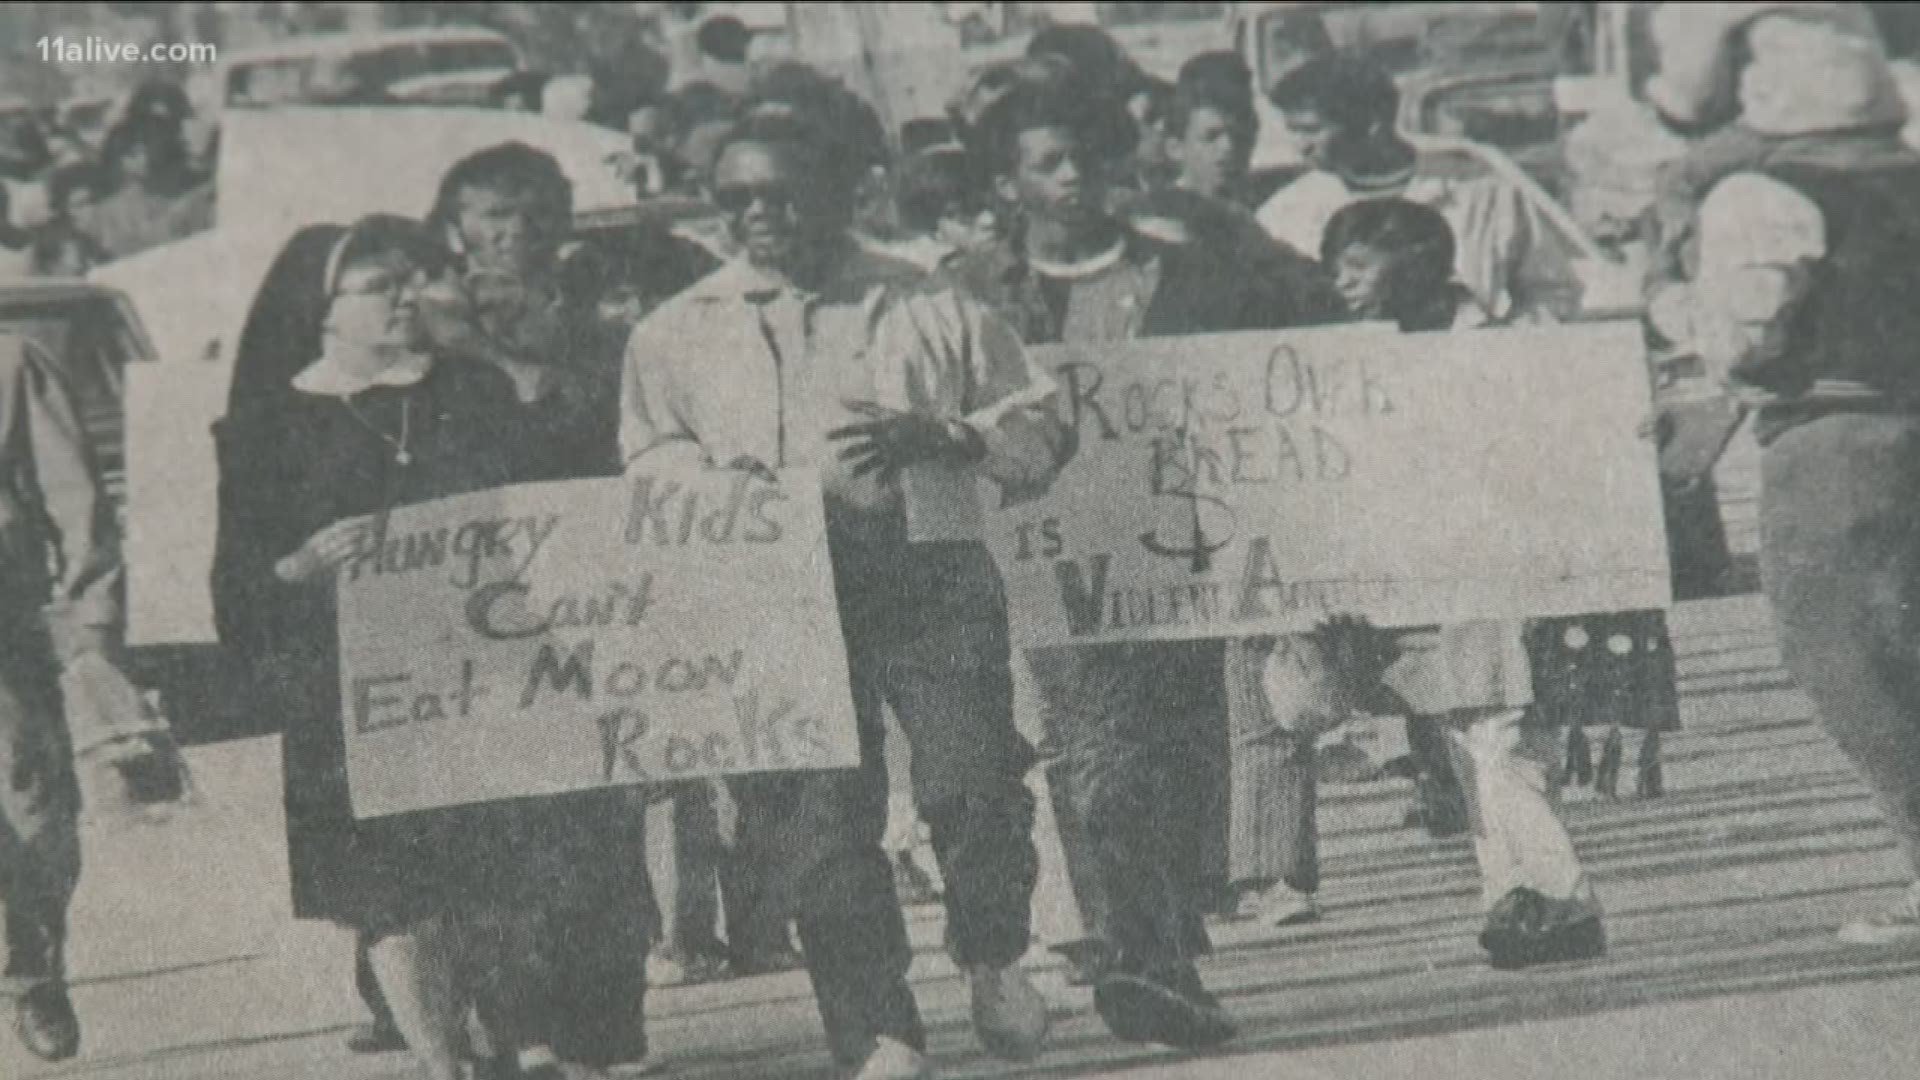 As the Apollo 11 astronauts prepared for launch, a bus on the grounds near the Kennedy Space Center emptied – and Atlanta civil rights figures Ralph Abernathy and Hosea Williams emerged to lead a protest against the space program.